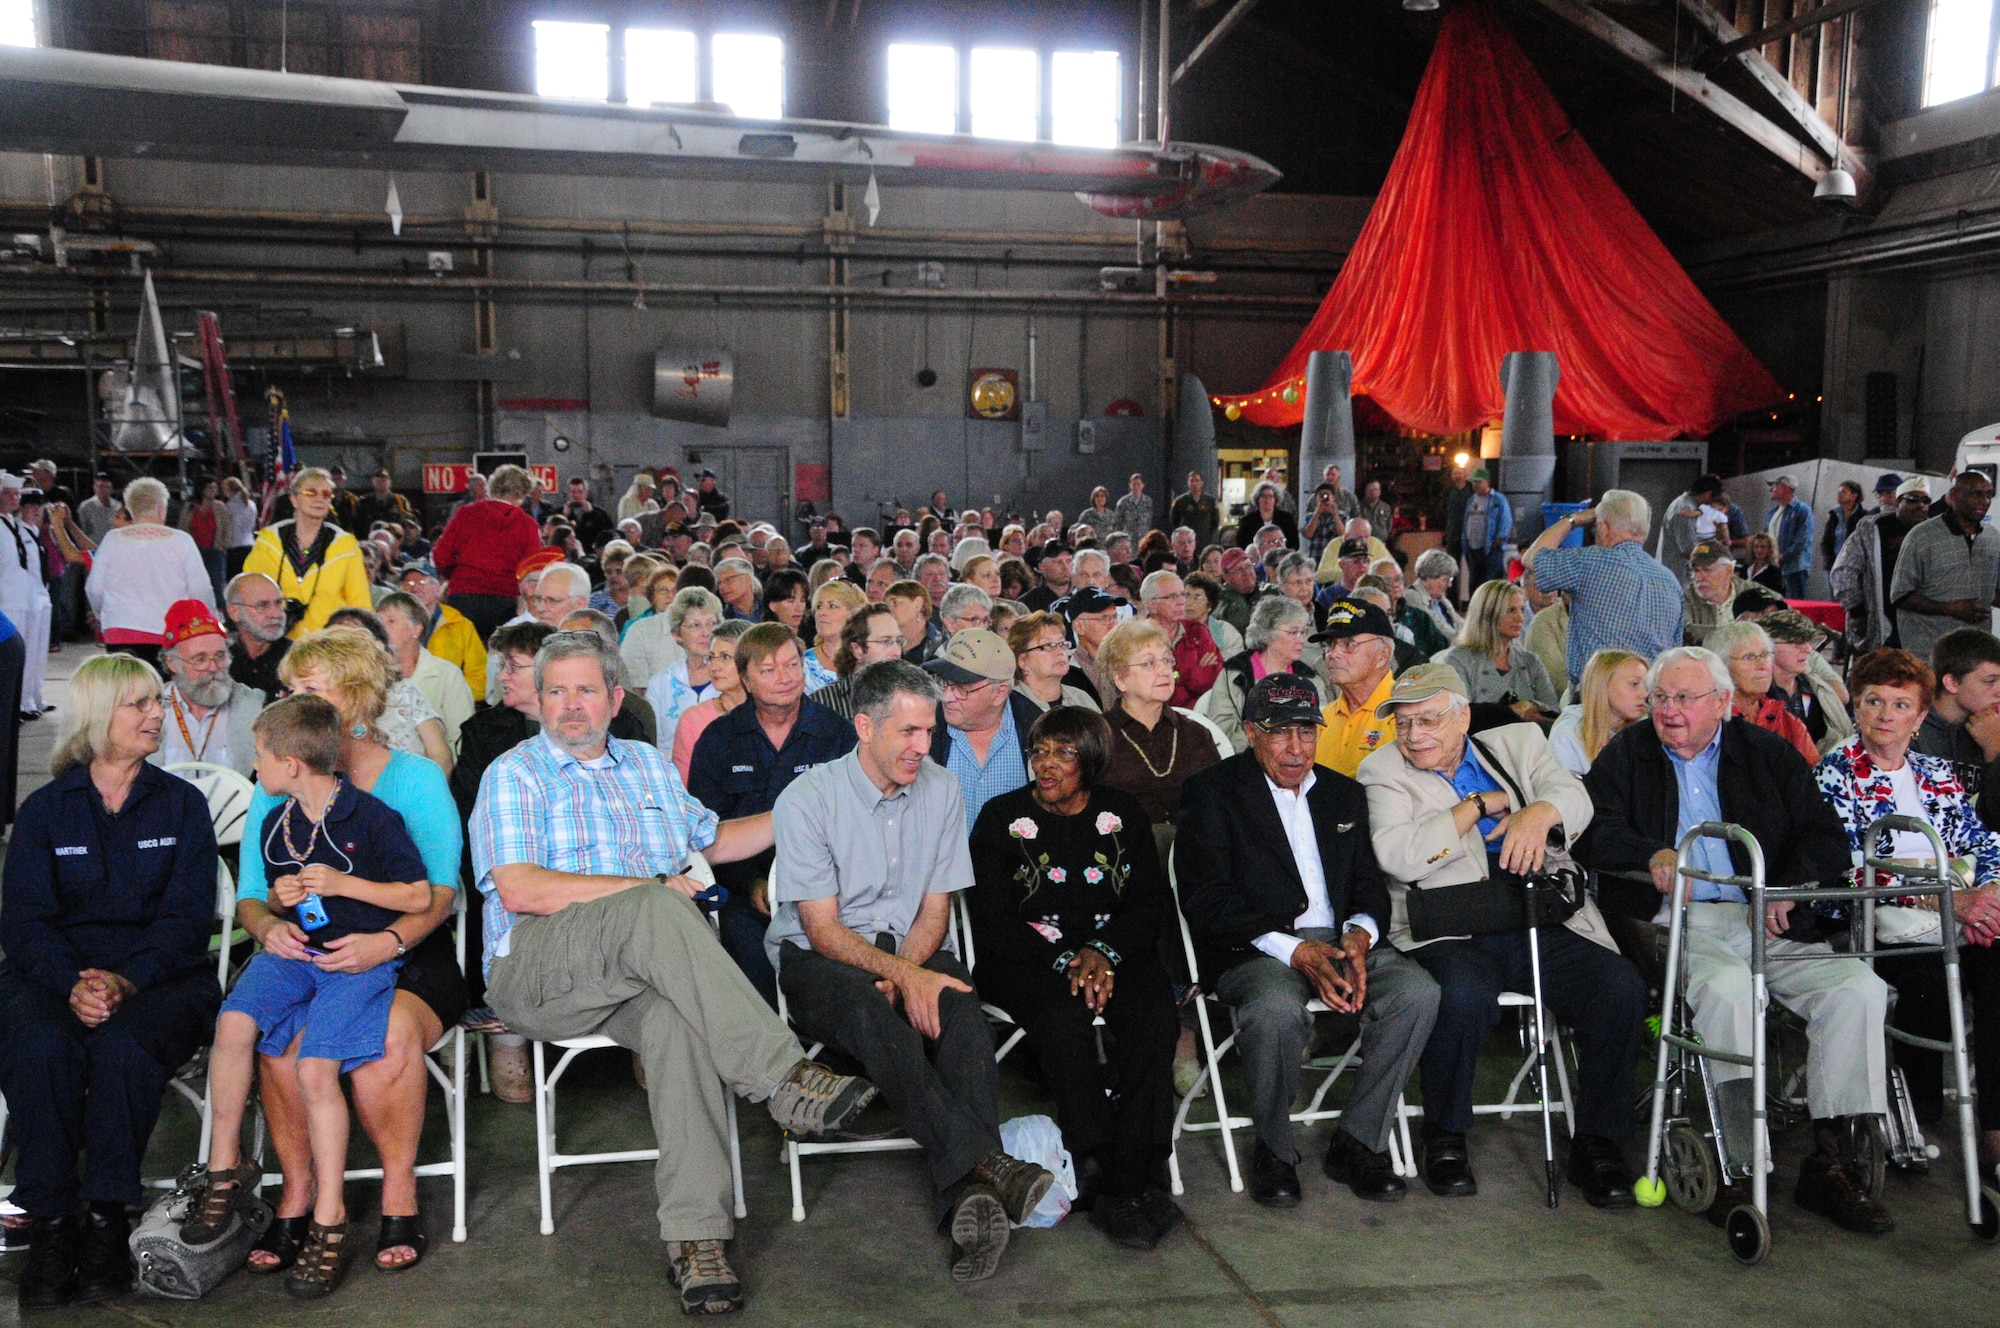 Maj. (Ret.) Joe Gomer and more than 200 family, friends and
community members attend a dedication ceremony June 23, 2012 at the
Commemorative Air Force hangar, Duluth, Minn. A bronze life-sized statue of
Gomer was unveiled, honoring his service and dedication during World War II.
(National Guard photo by Staff Sgt. Don L. Acton.)